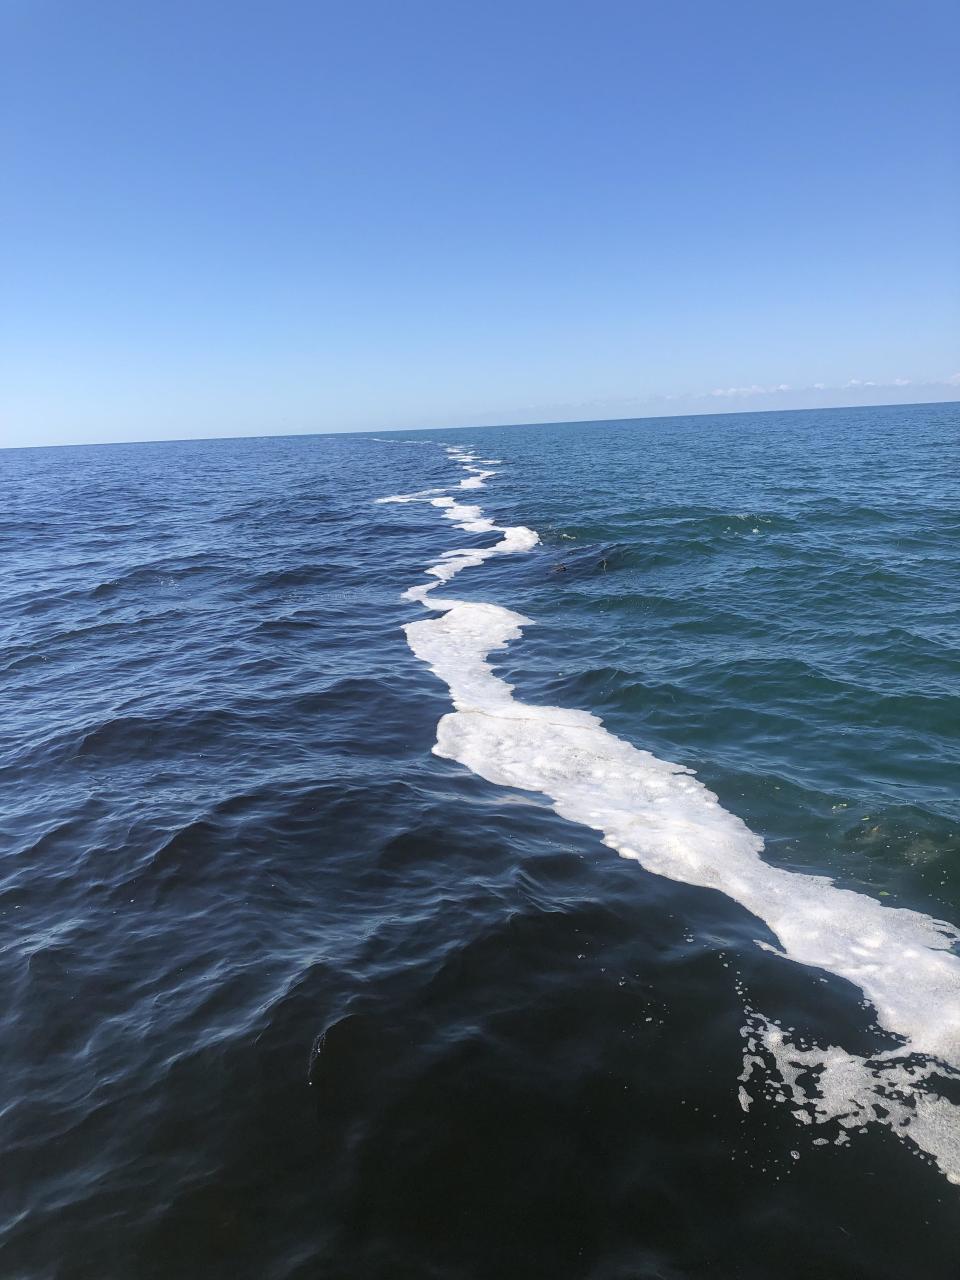 Tannins from decomposing plant matter (on the left) are seen flowing into the blue-green water of the Gulf of Mexico. This image was captured about 1.5 mile into the Gulf.  / Credit: Dave Tomasko